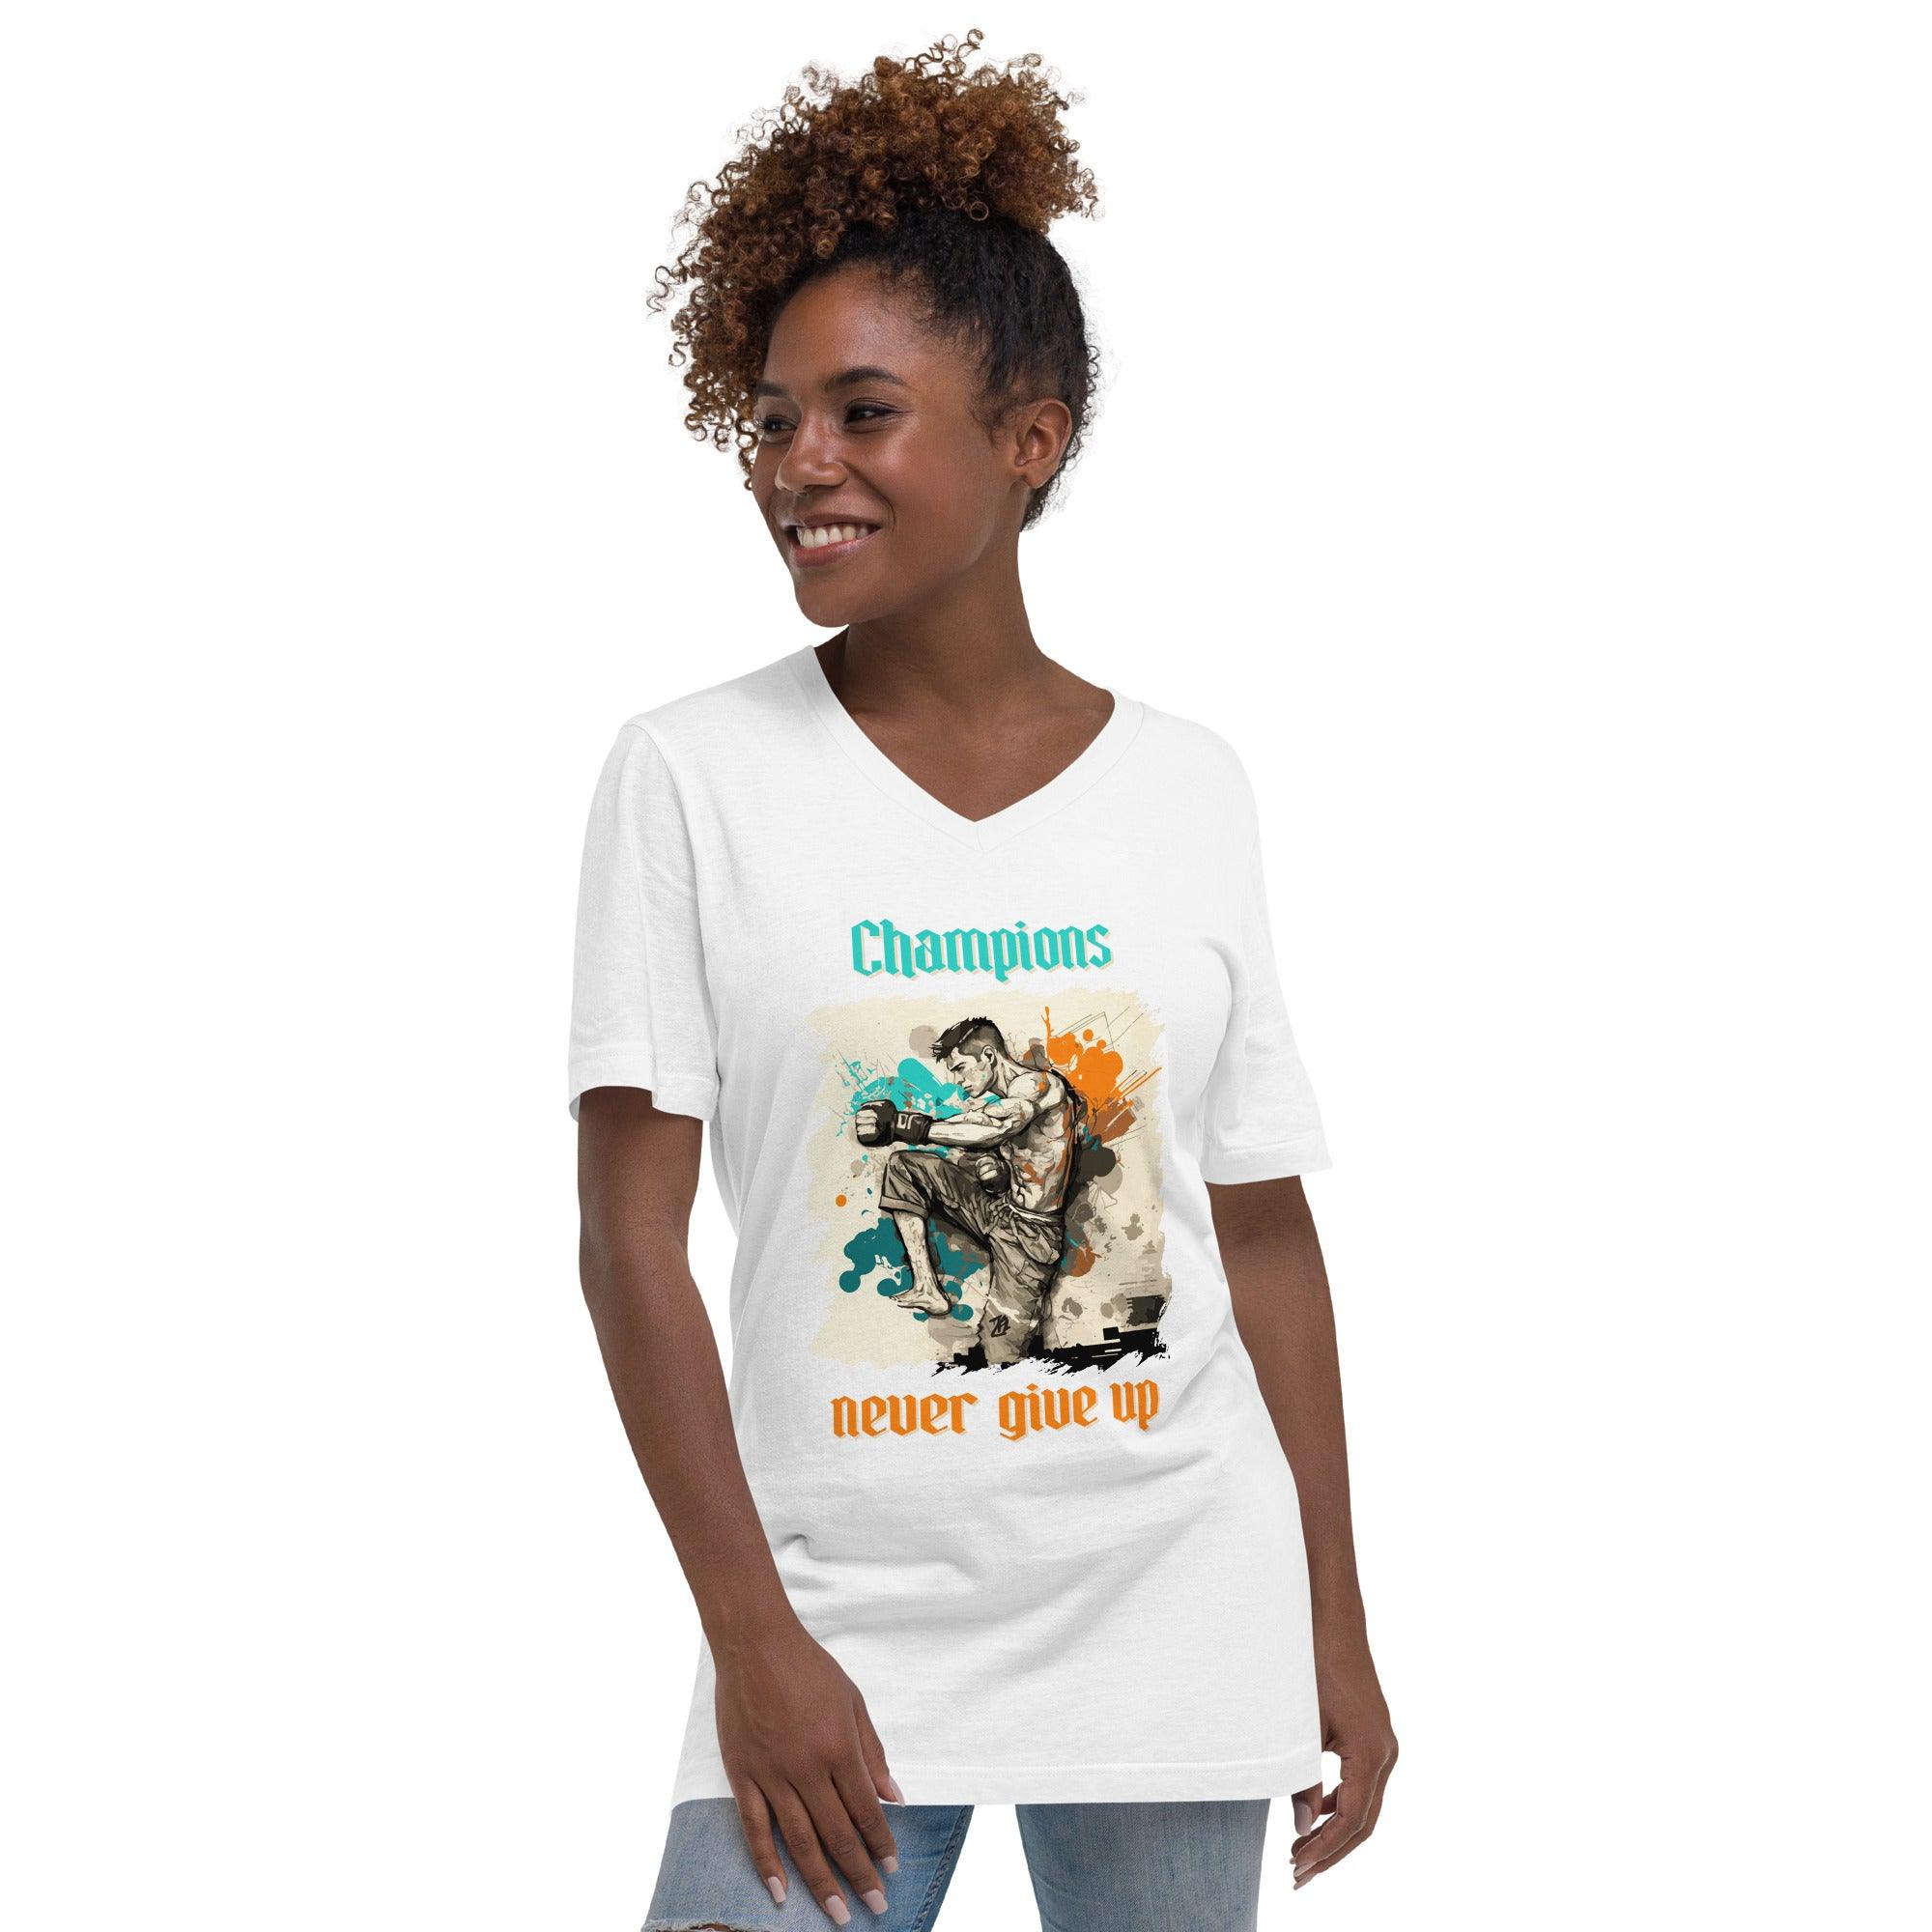 Champions Never Give Up Unisex Short Sleeve V-Neck T-Shirt - Beyond T-shirts